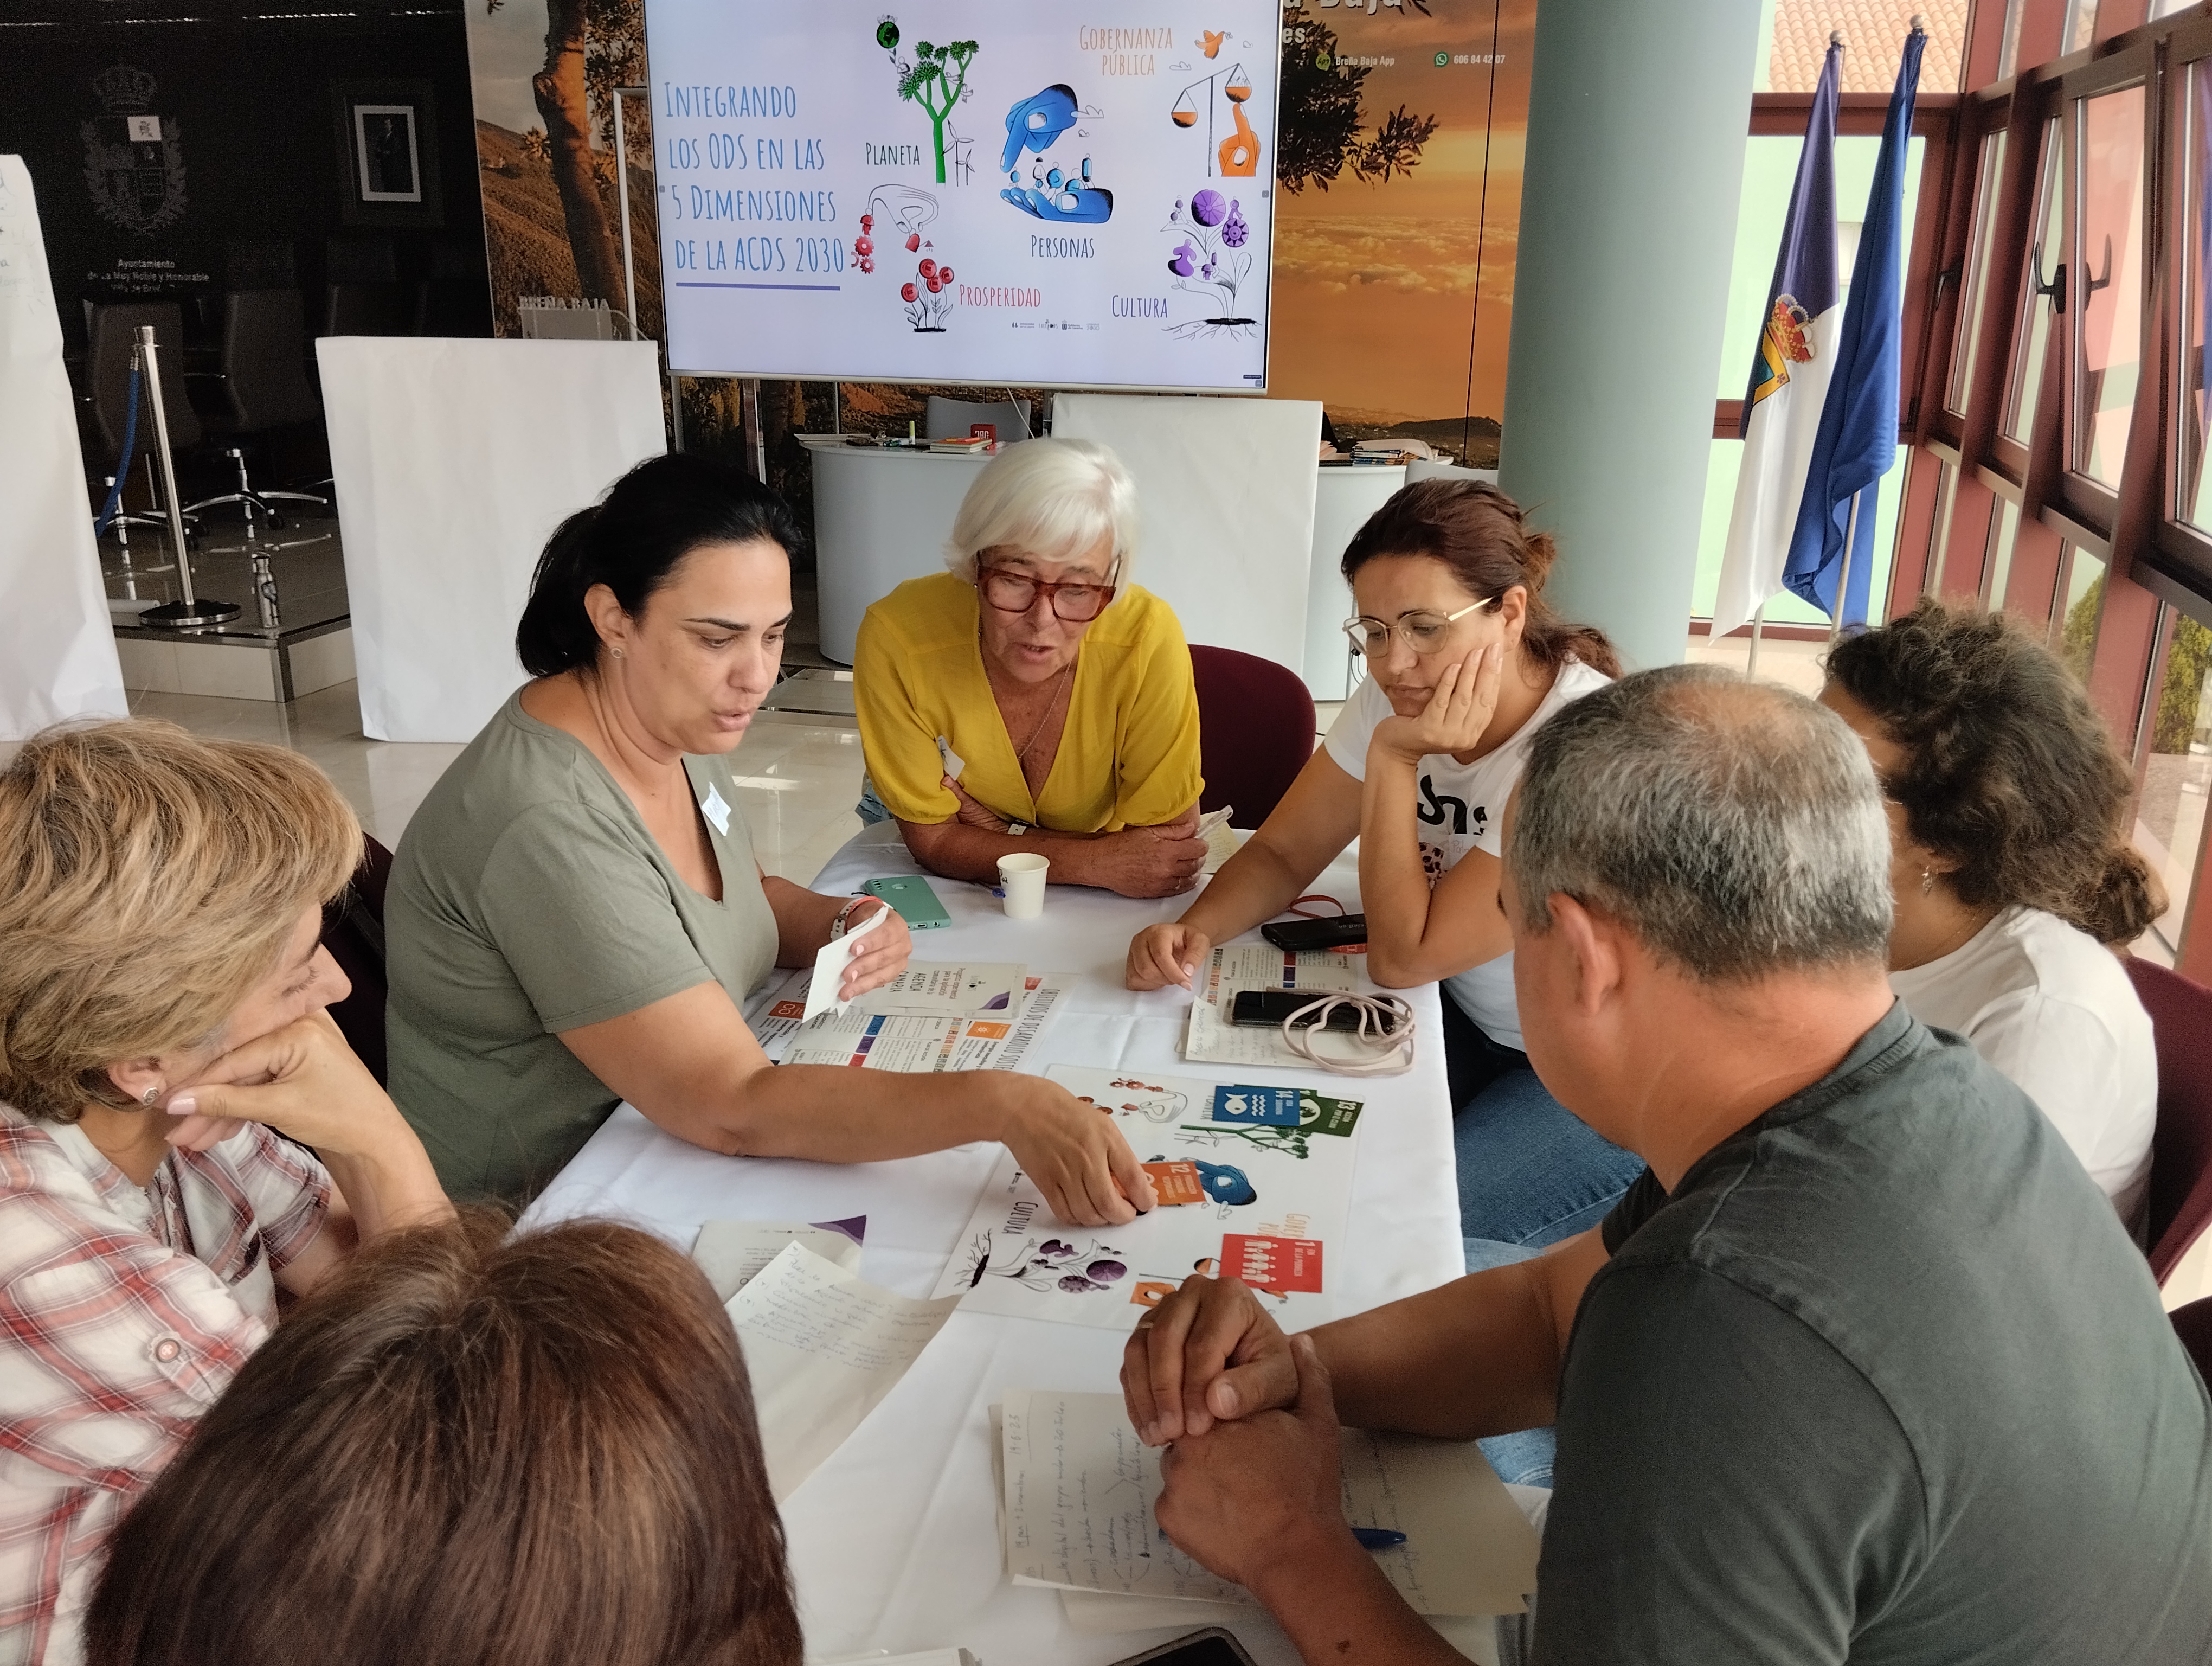 Training session in the selected locality of San José, Breña Baja, La Palma, where a group of participants is developing the dynamic 'Integrating the SDGs in the five dimensions of the Canary Islands Agenda for Sustainable Development 2023'. Photo from BarriODS Team.